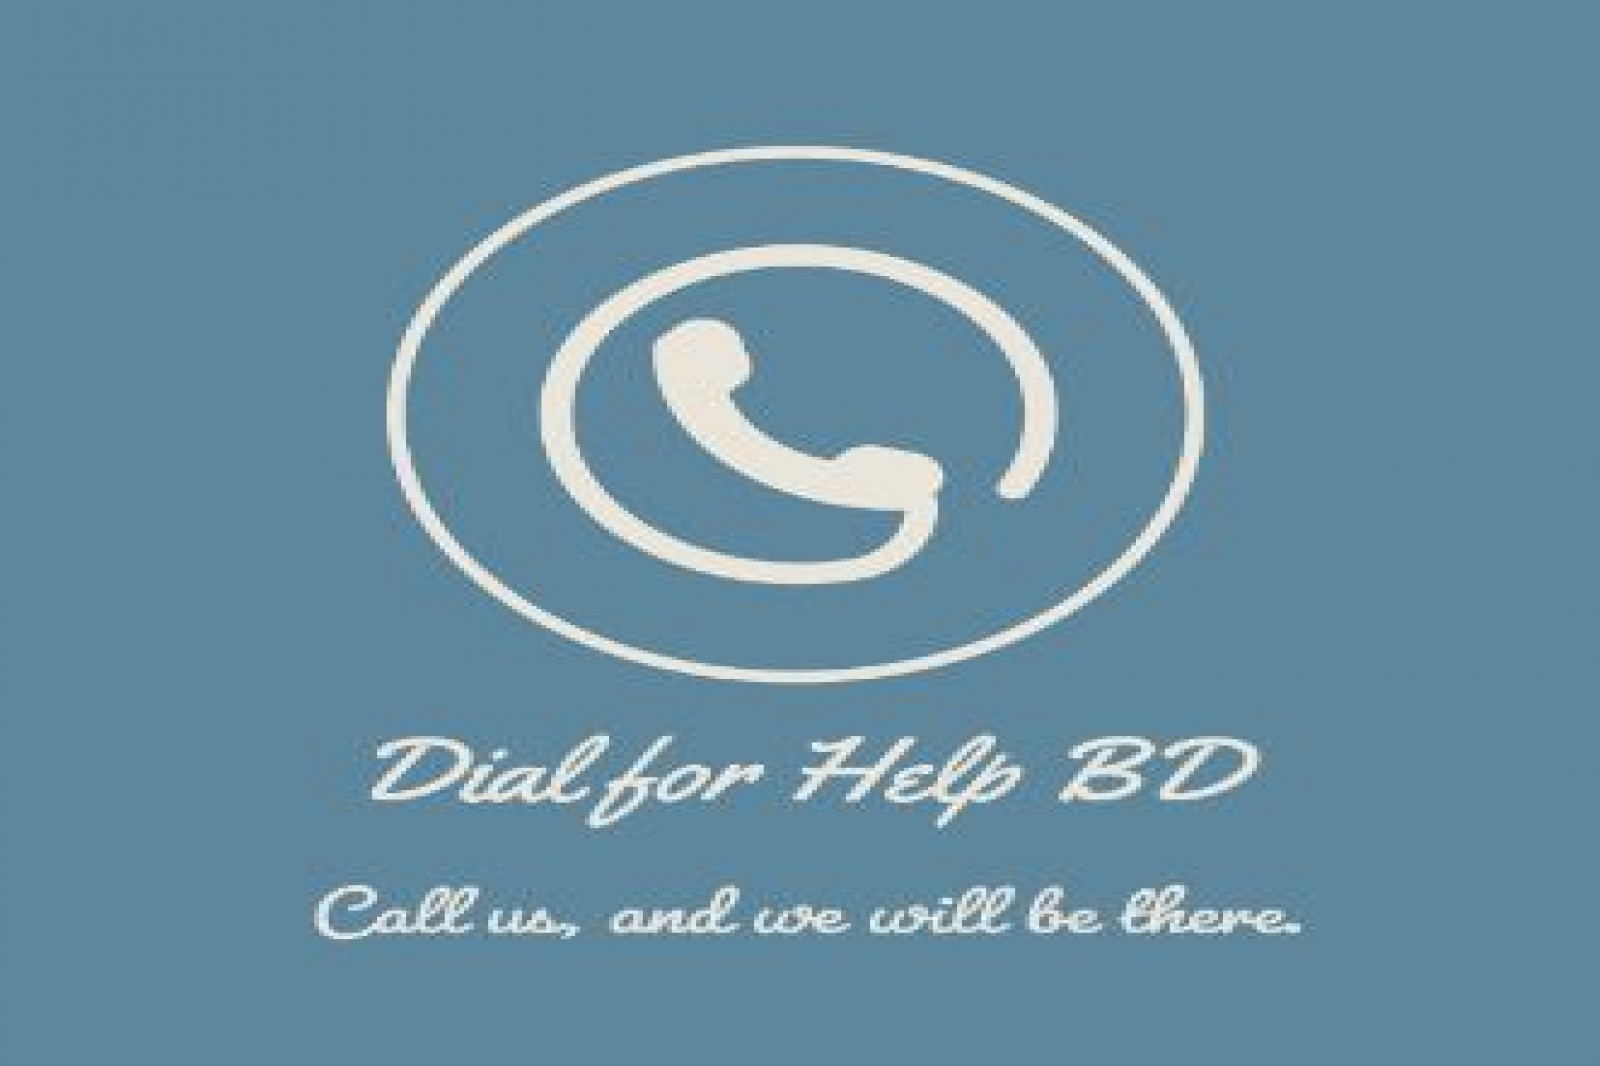 Dial For Help Bd